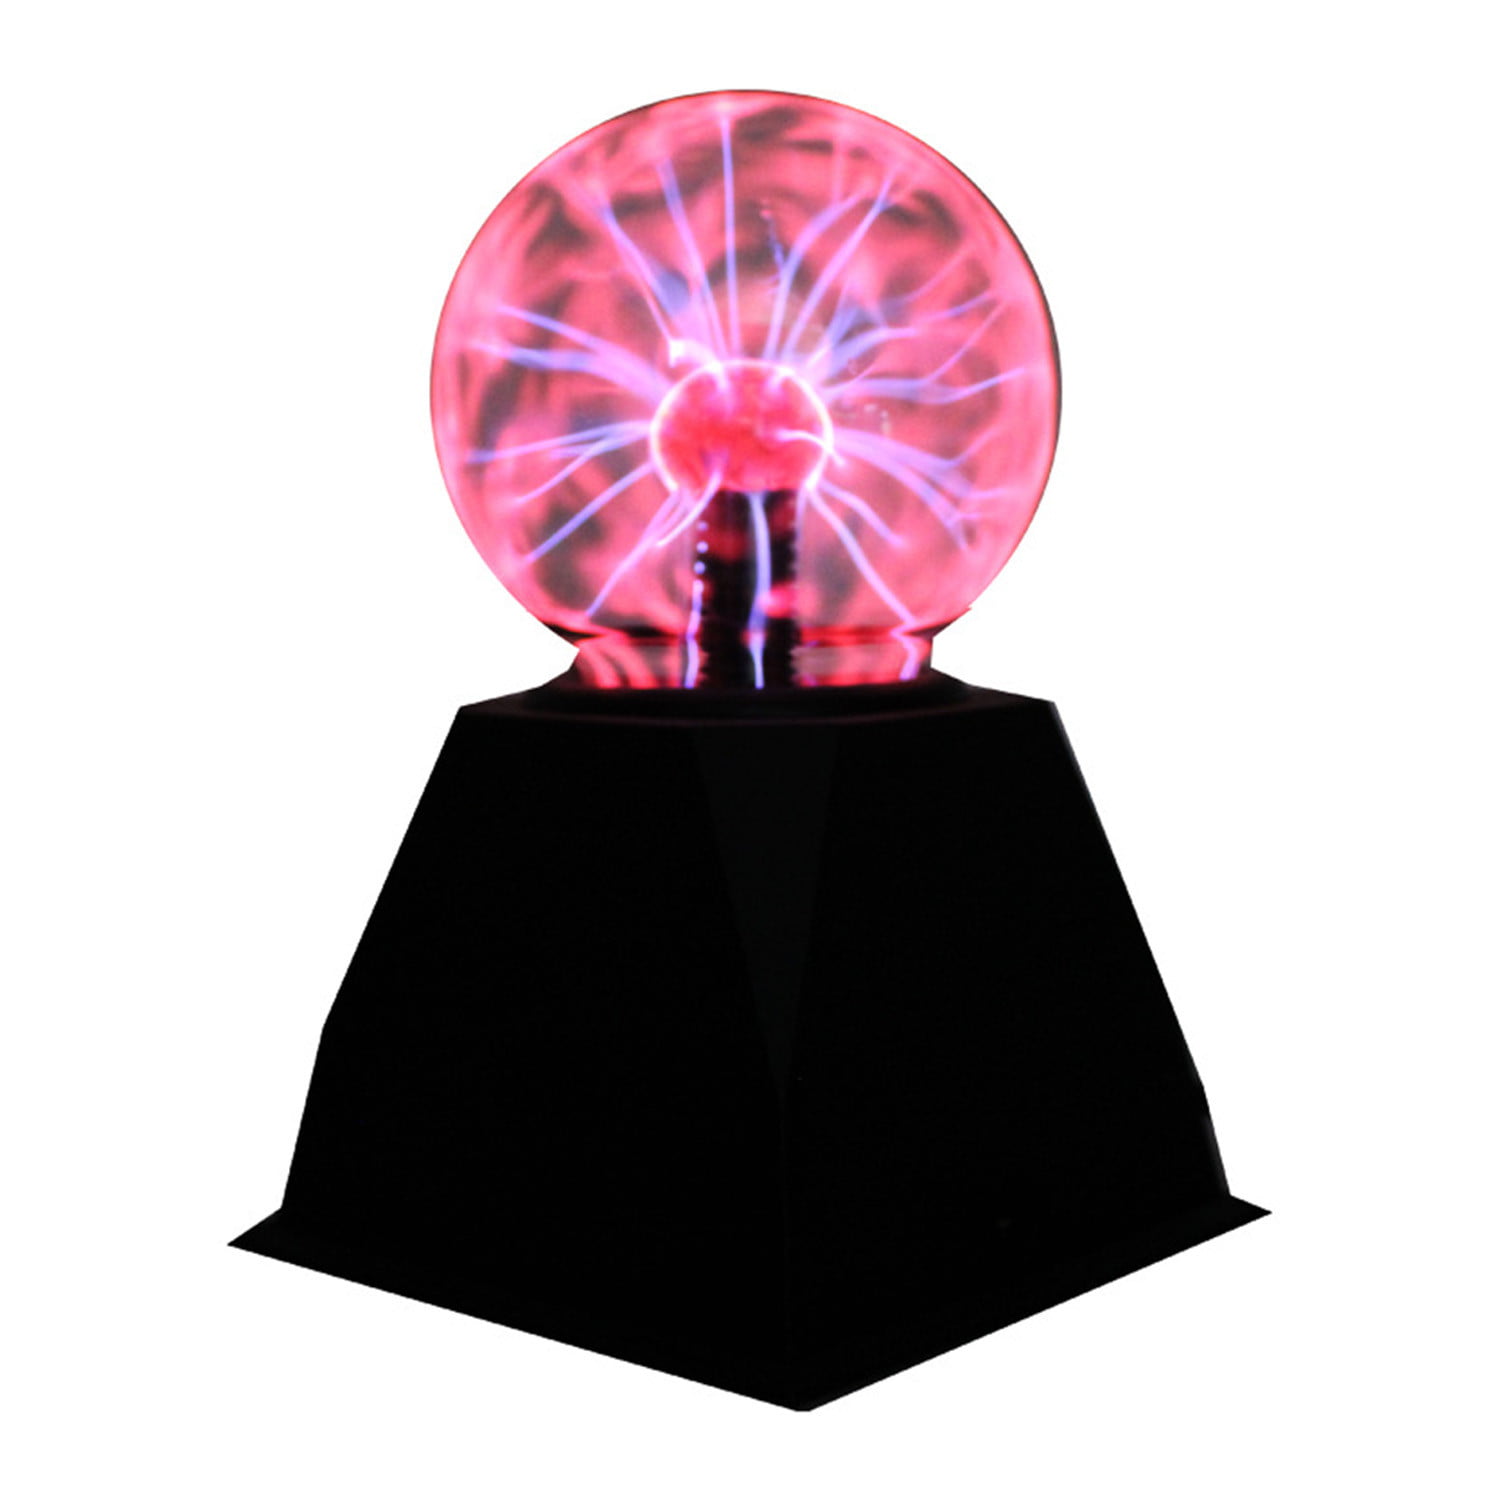 New Plasma Ball Lamp Sphere Glow Night Light Decor Party Gift box Wall Charge 